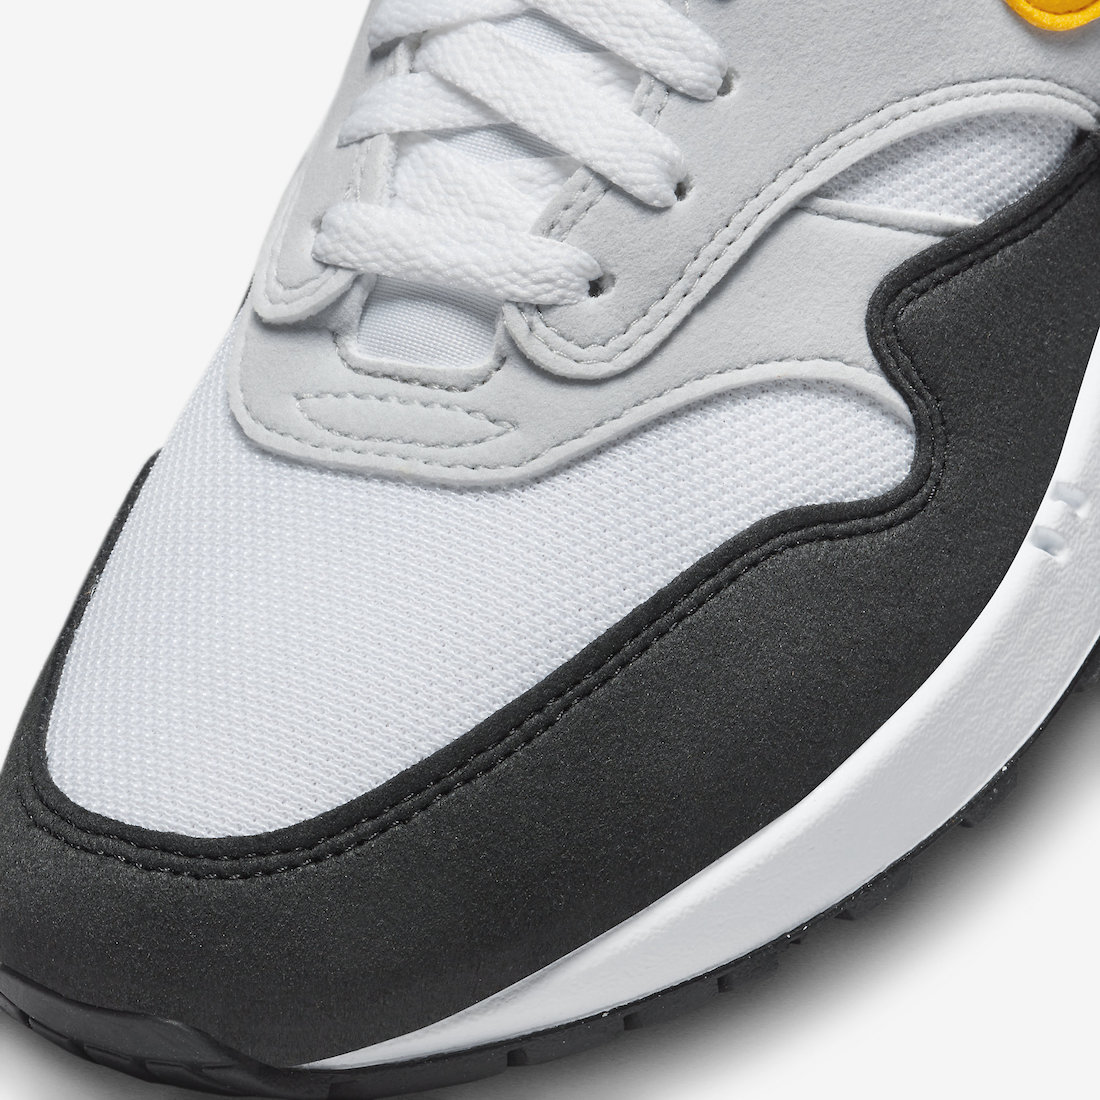 Nike Air Max 1 White University Gold FD9082-104 Release Date | SneakerFiles